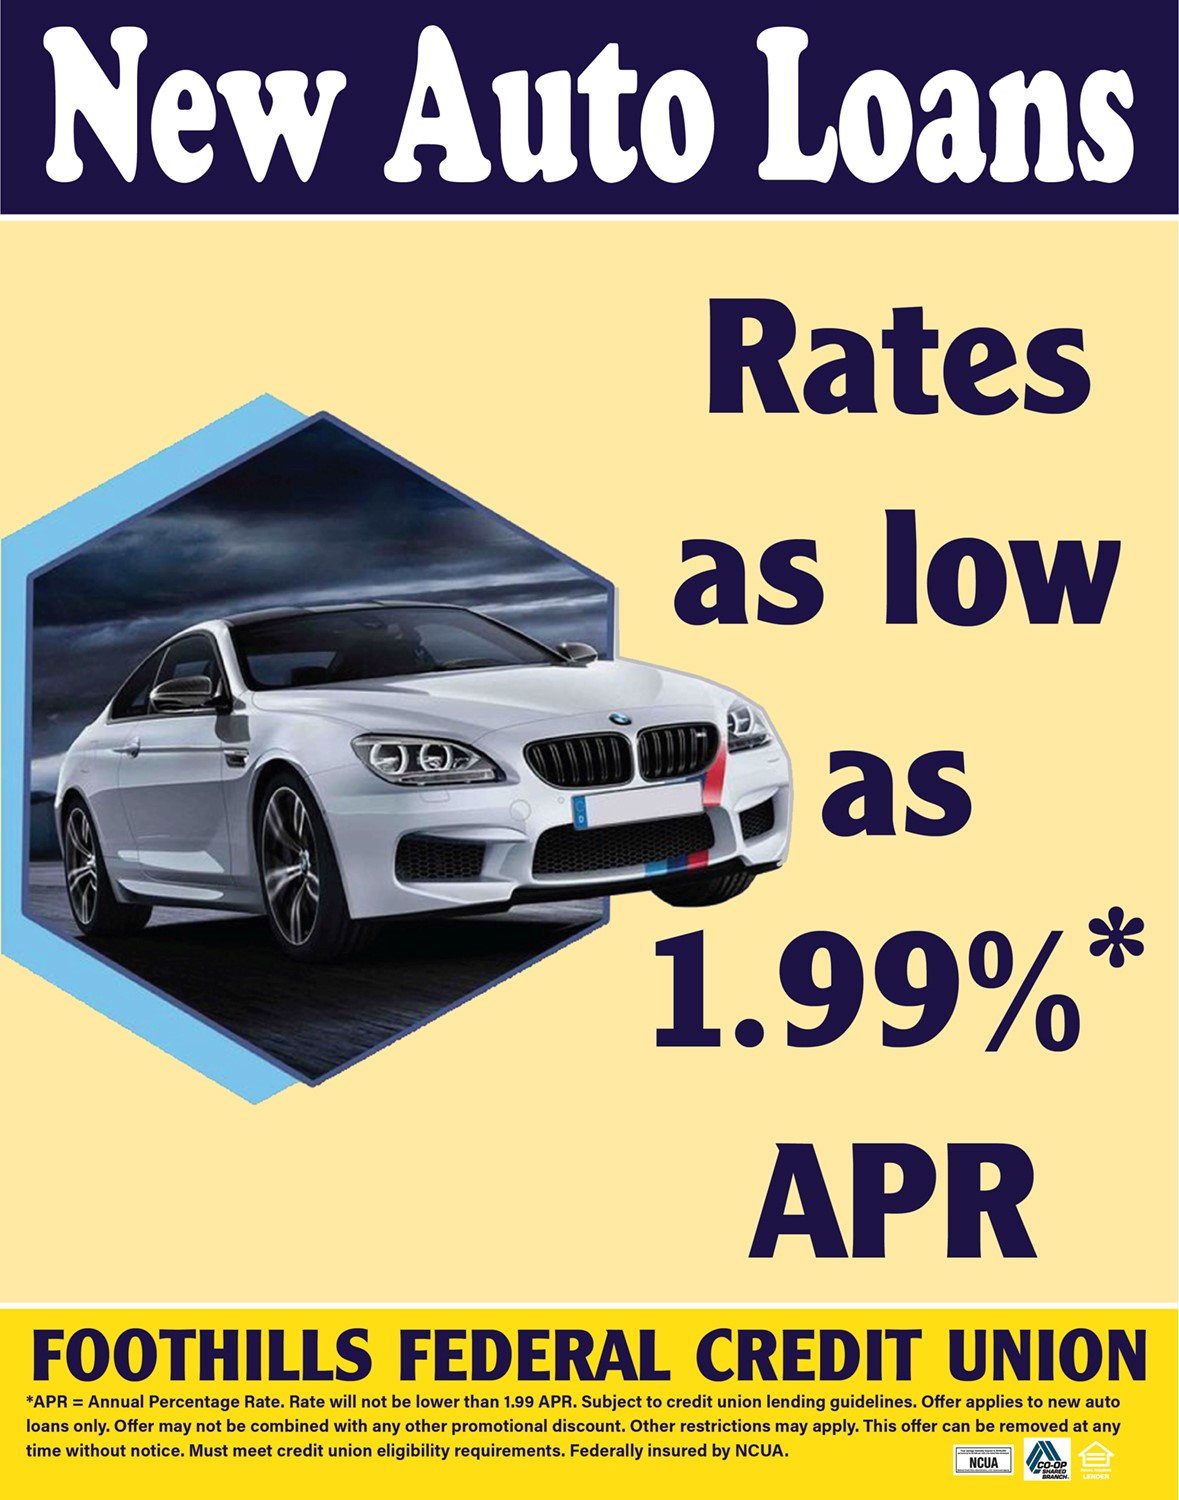 Image of a white car with the wording New Auto Loans Rates as low as 1.99%.